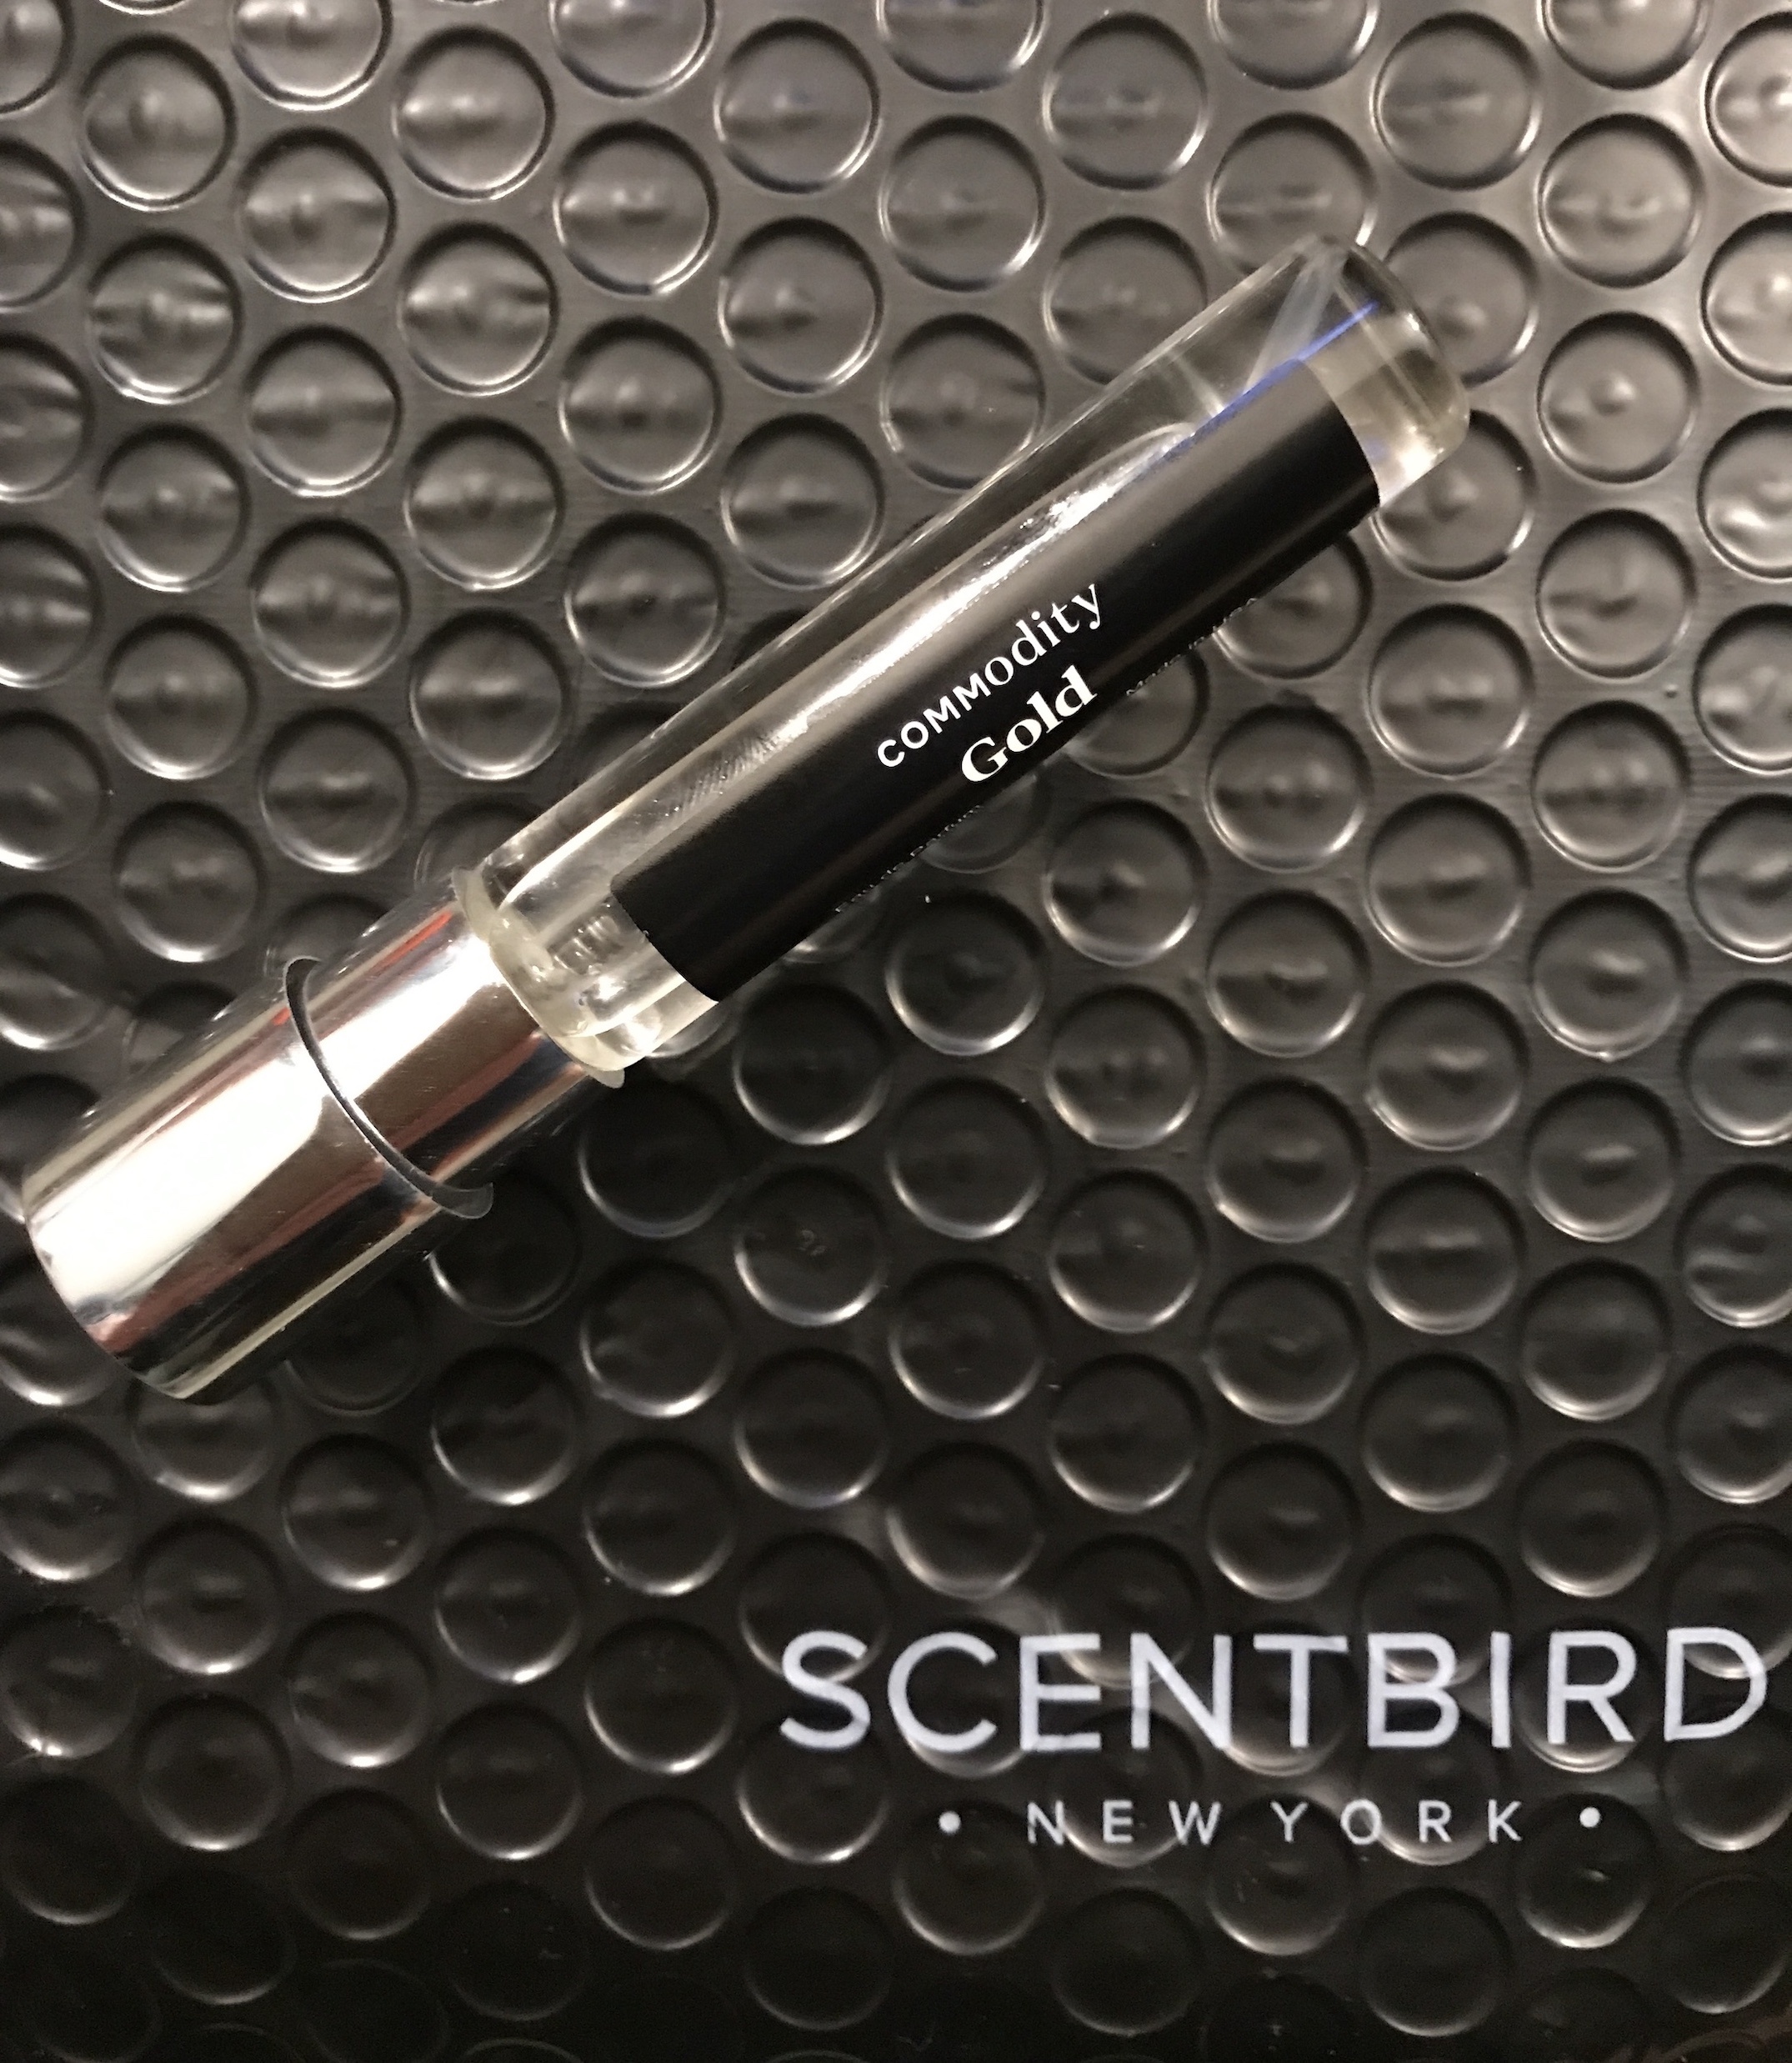 Add Some Color To Your Case Collection - Scentbird Blog